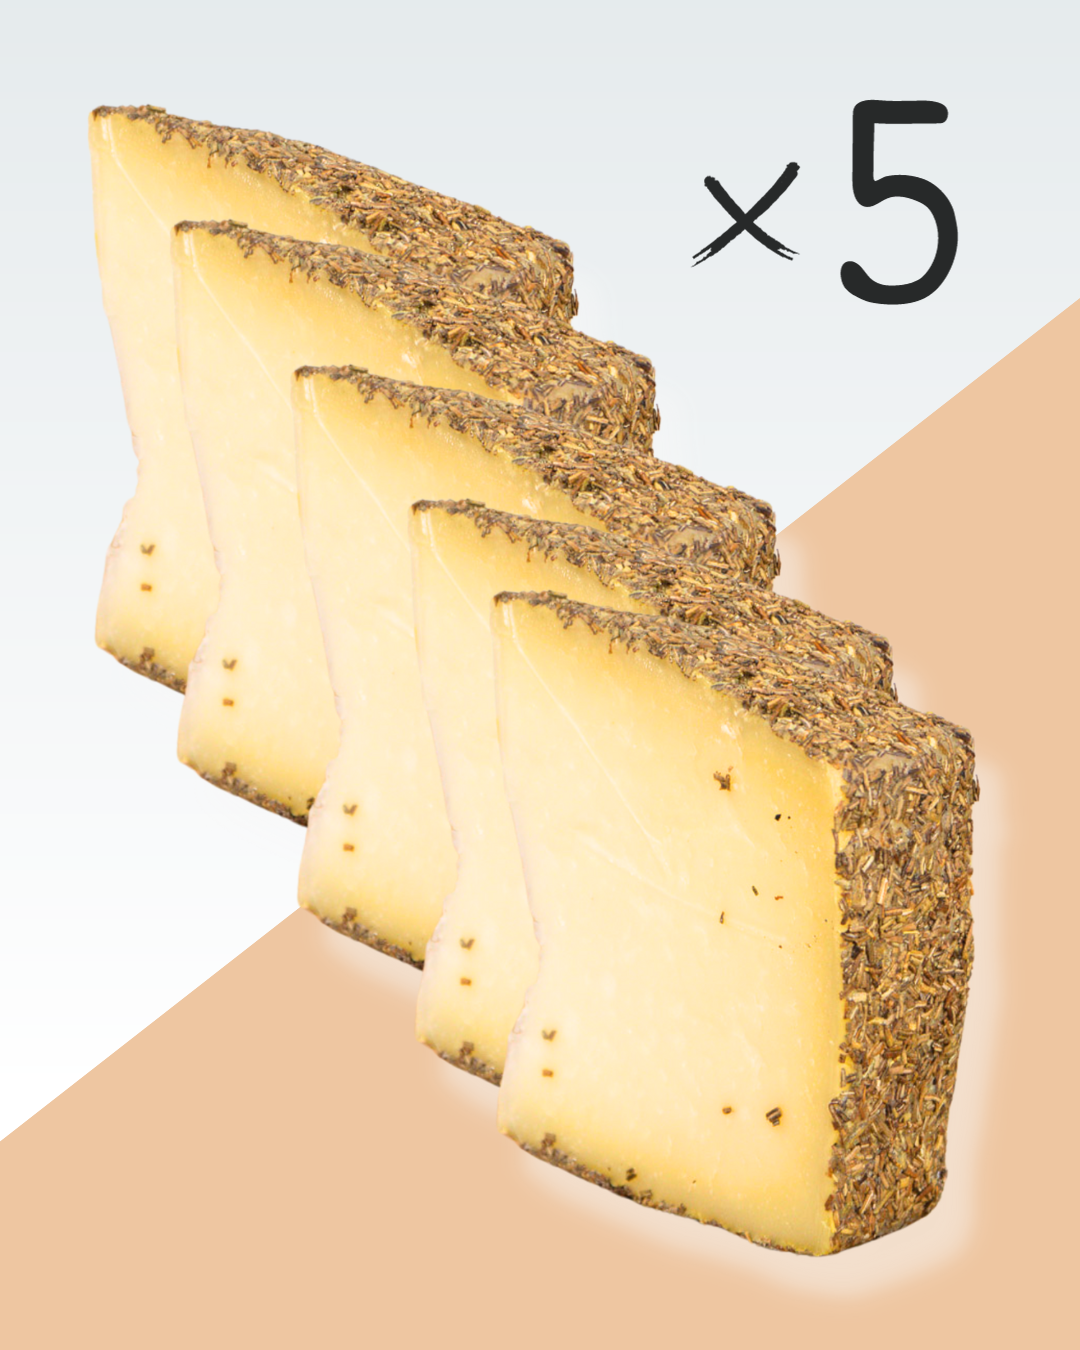 Manchego Rosemary Cheese Portion (5x Saving Pack)